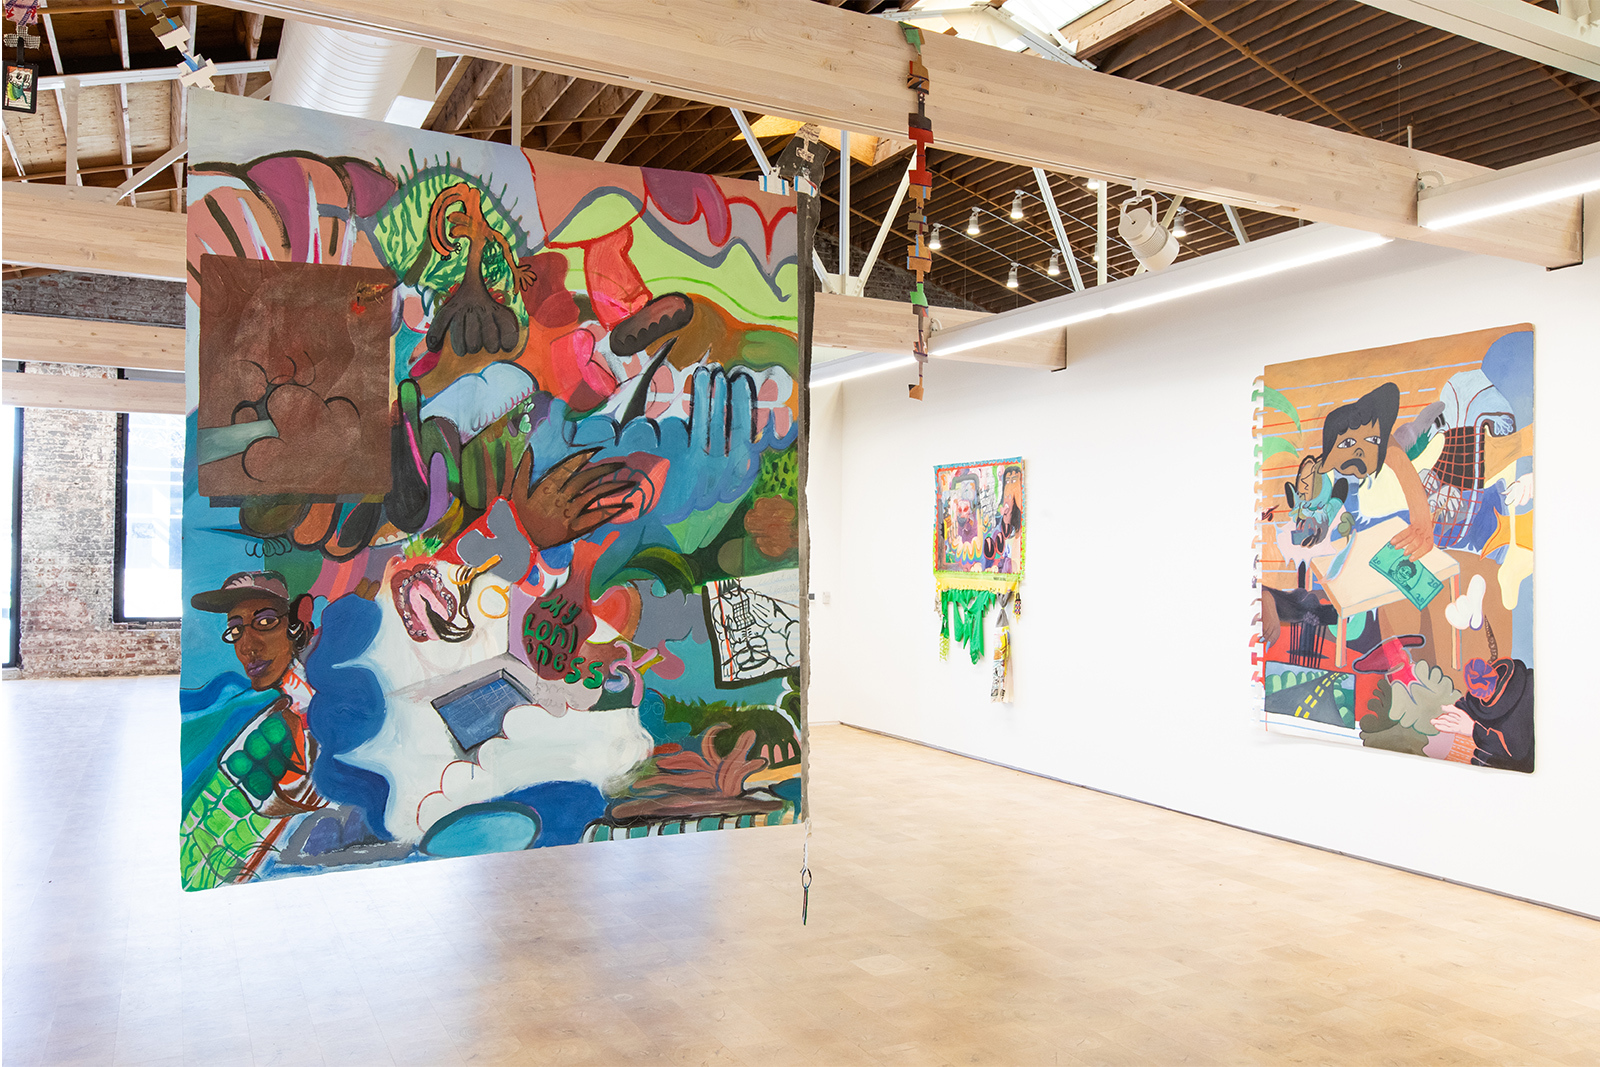 Half gallery view of Rodgers' exhibit with a large unframed canvas handing from the center beam. Canvas is painted is an abstract collage of bright colors, including a small self portrait of the artist peeking out from behind a cloud.